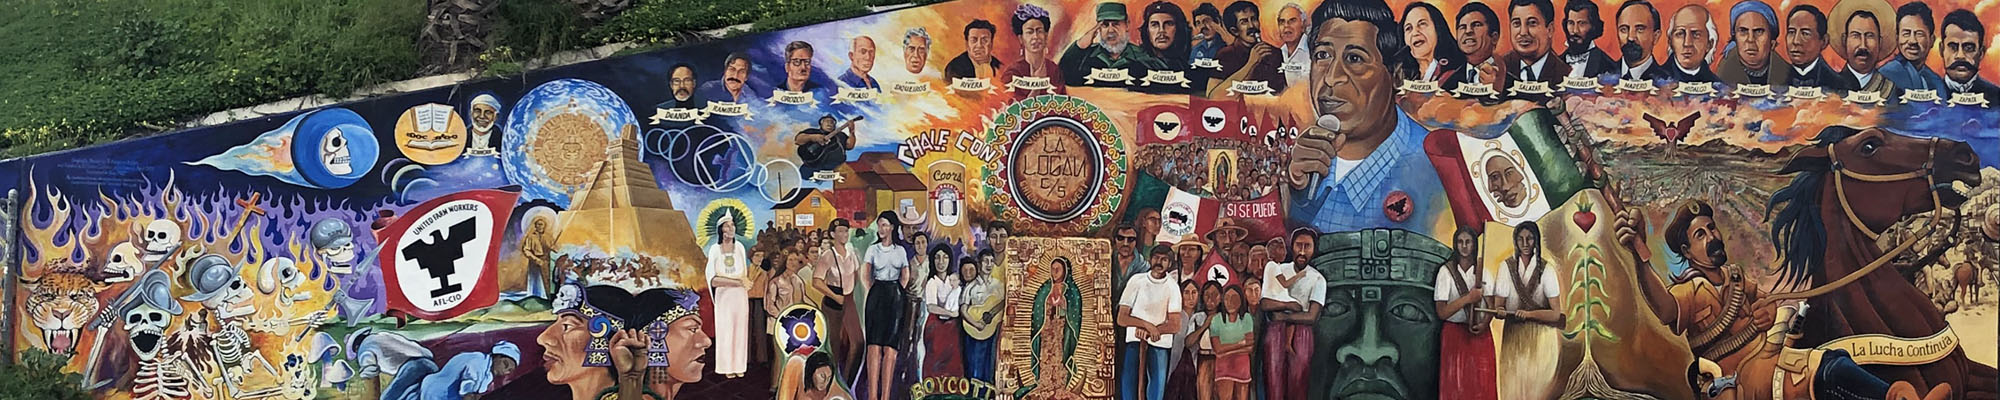 Chicano Park Mural